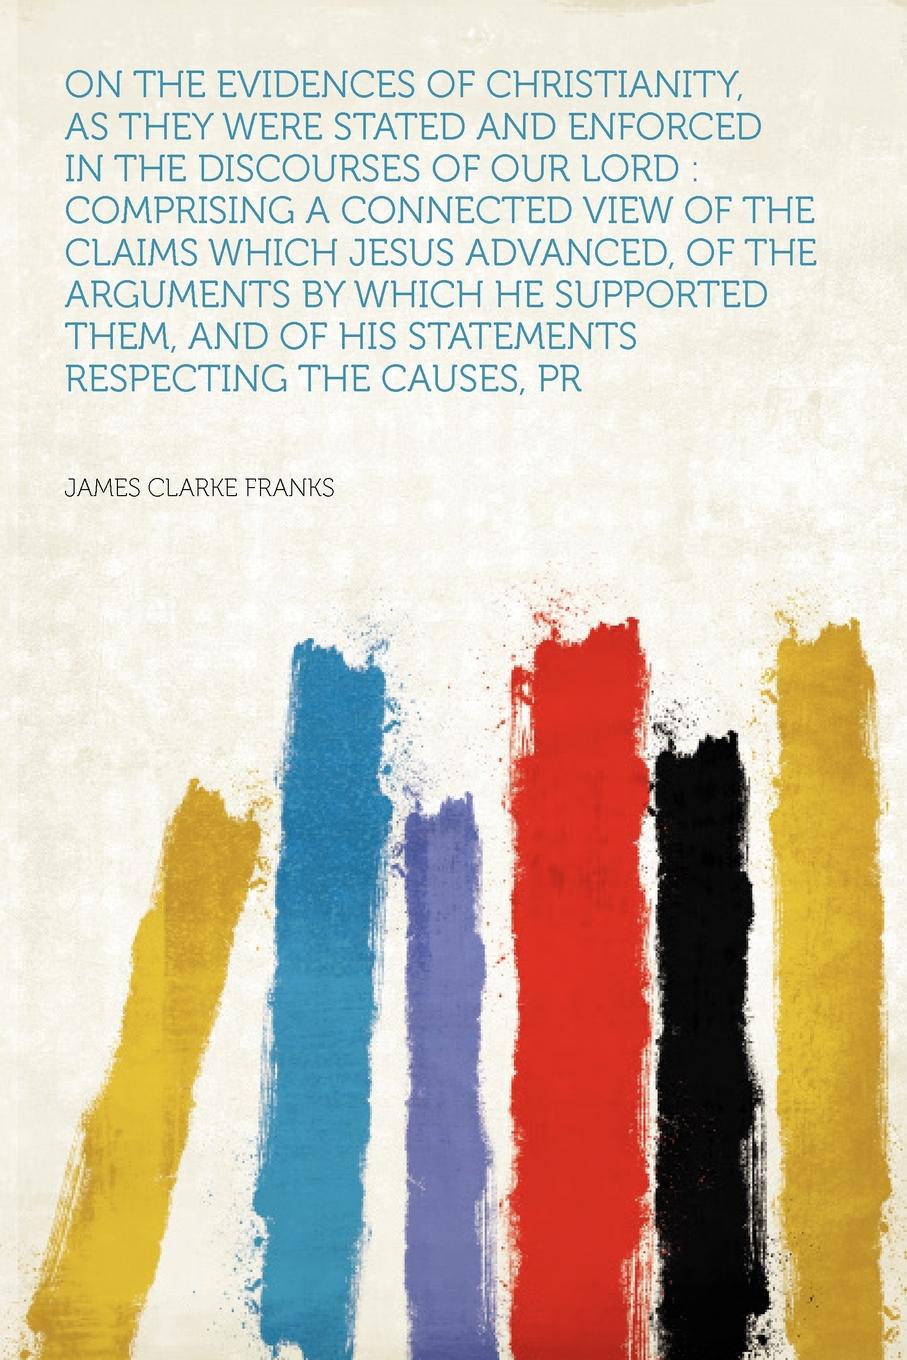 On the Evidences of Christianity, as They Were Stated and Enforced in the Discourses of Our Lord. Comprising a Connected View of the Claims Which Jesus Advanced, of the Arguments by Which He Supported Them, and of His Statements Respecting the Cau...